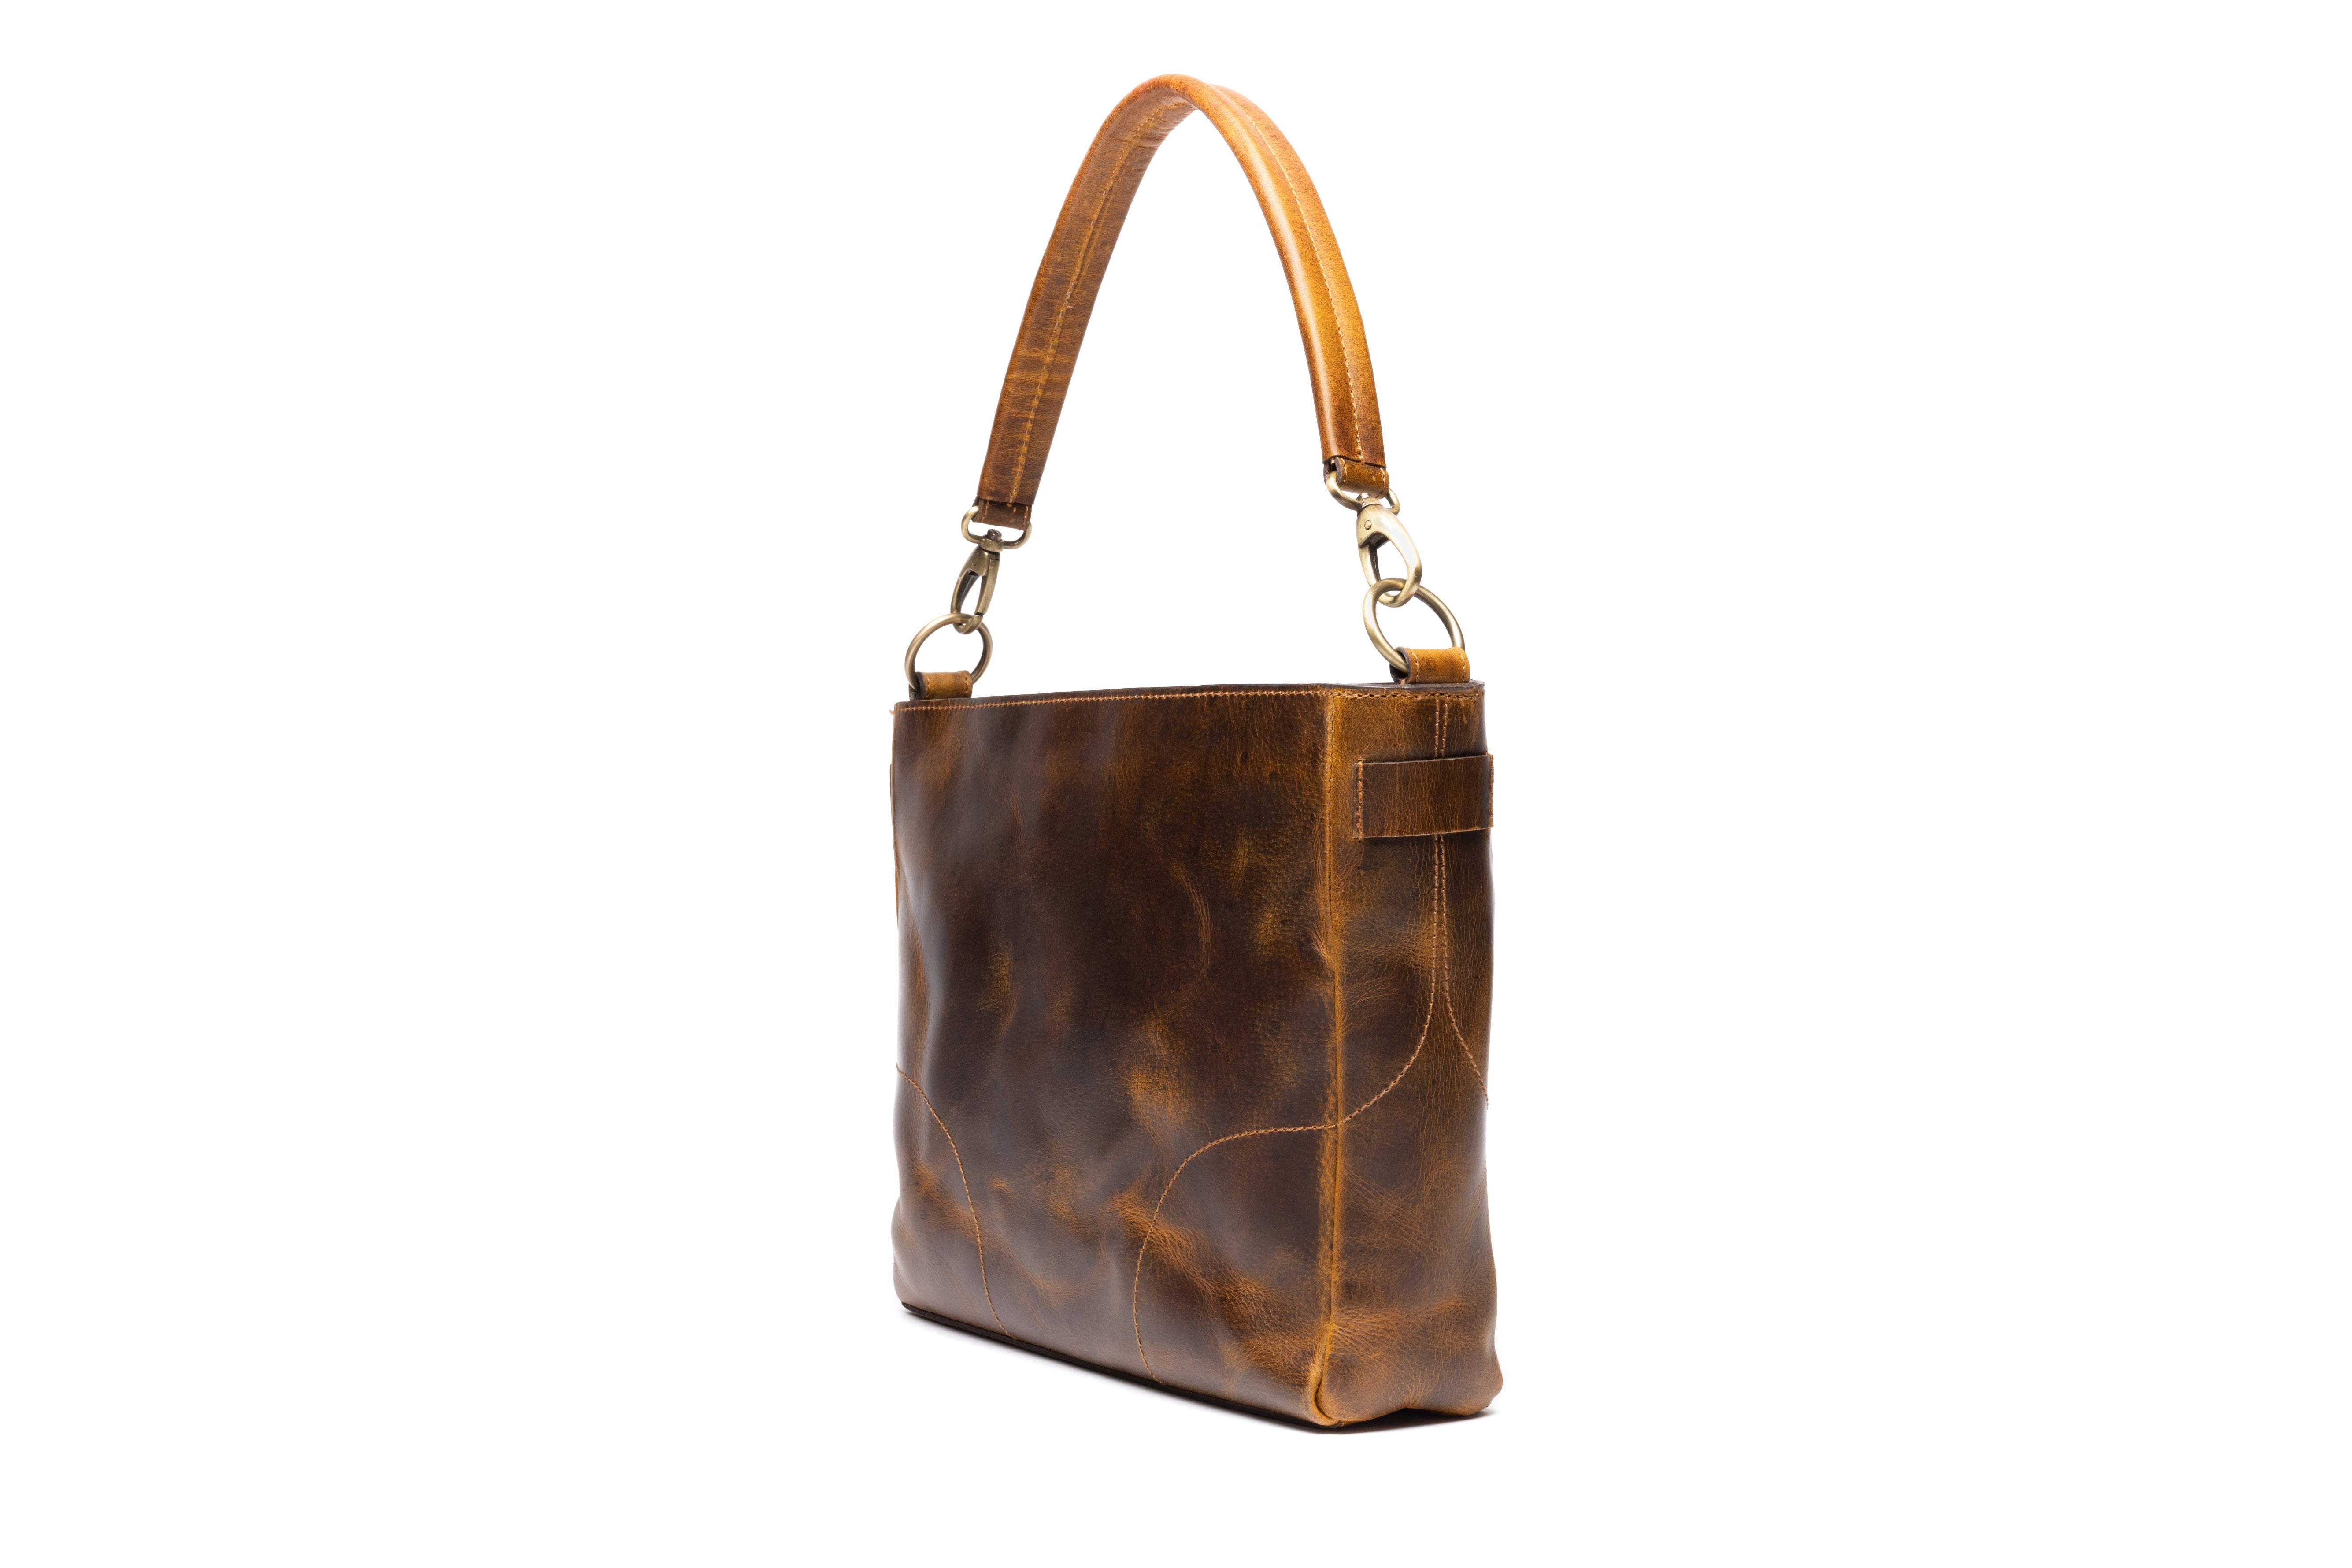 Catherine Leather Purse: A large brown leather bag with a handle and straps. 